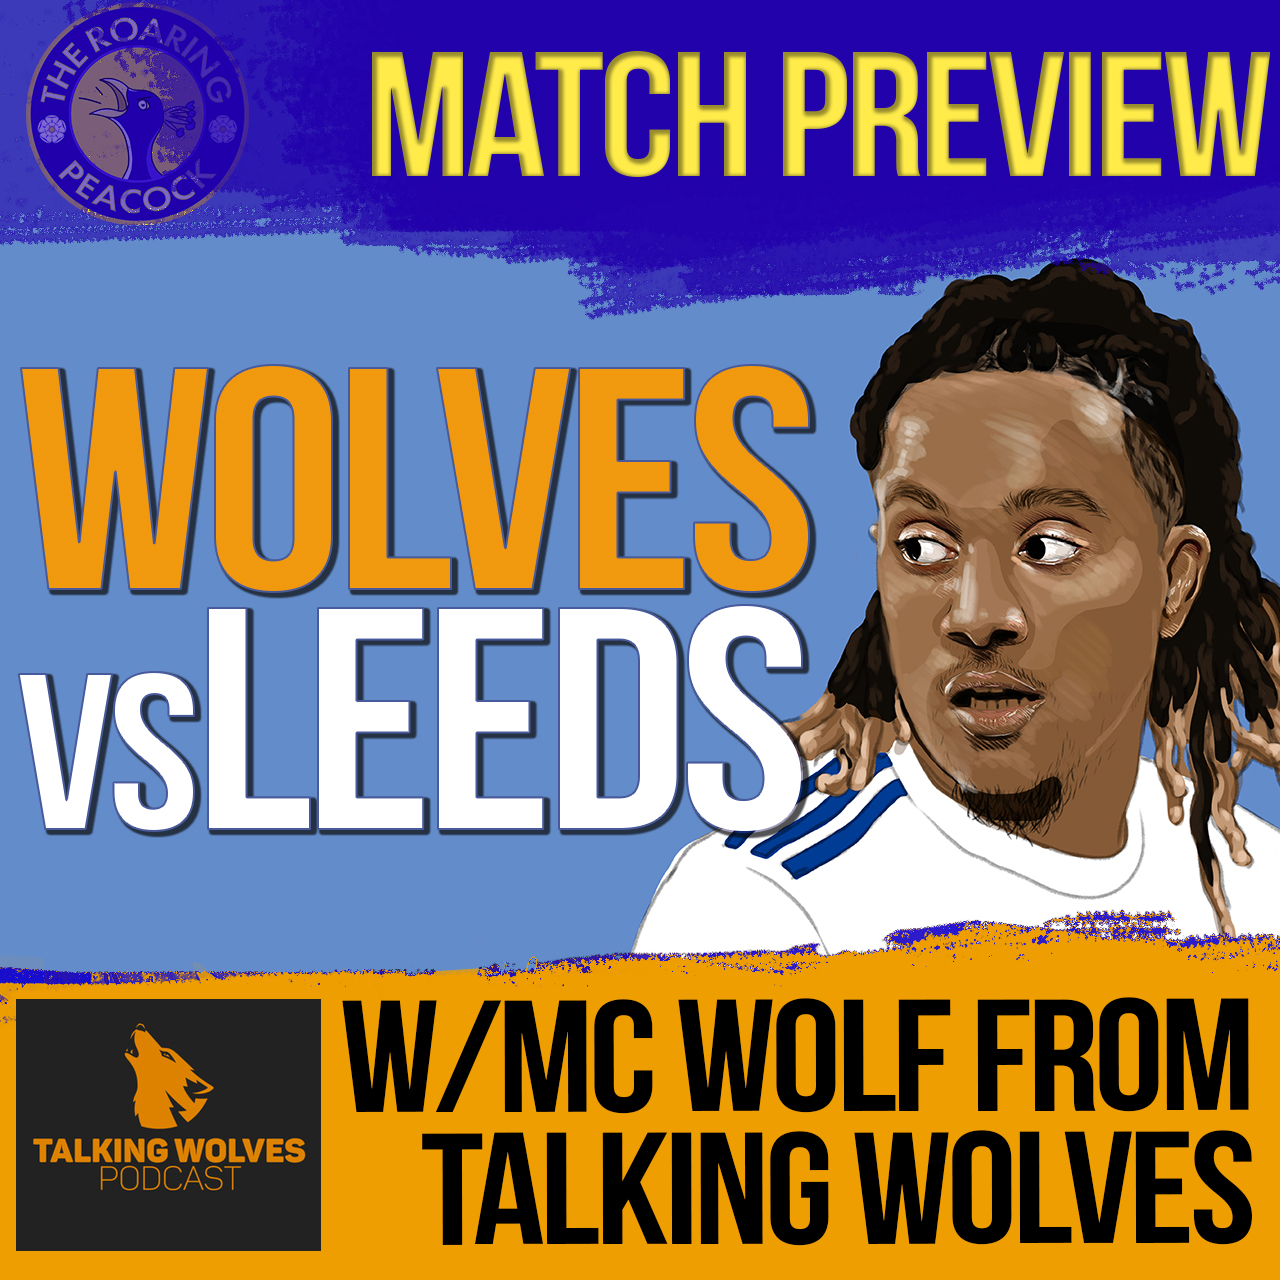 Wolves v Leeds | Match Preview feat. MC Wolf from Talking Wolves